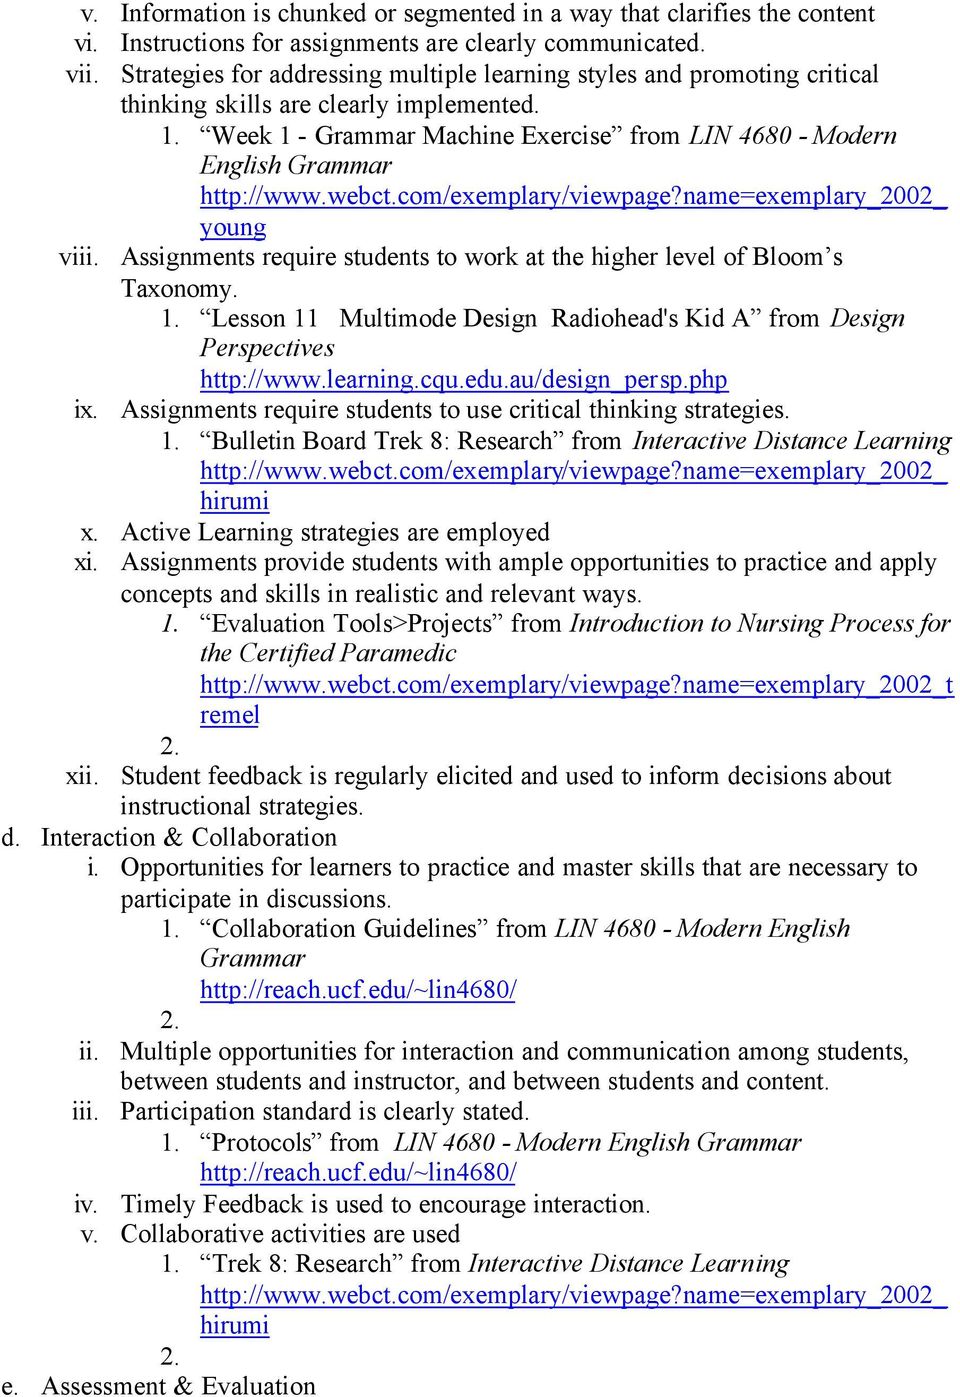 Week 1 - Grammar Machine Exercise from LIN 4680 - Modern English Grammar young viii. Assignments require students to work at the higher level of Bloom s Taxonomy. 1. Lesson 11 Multimode Design Radiohead's Kid A from Design Perspectives http://www.